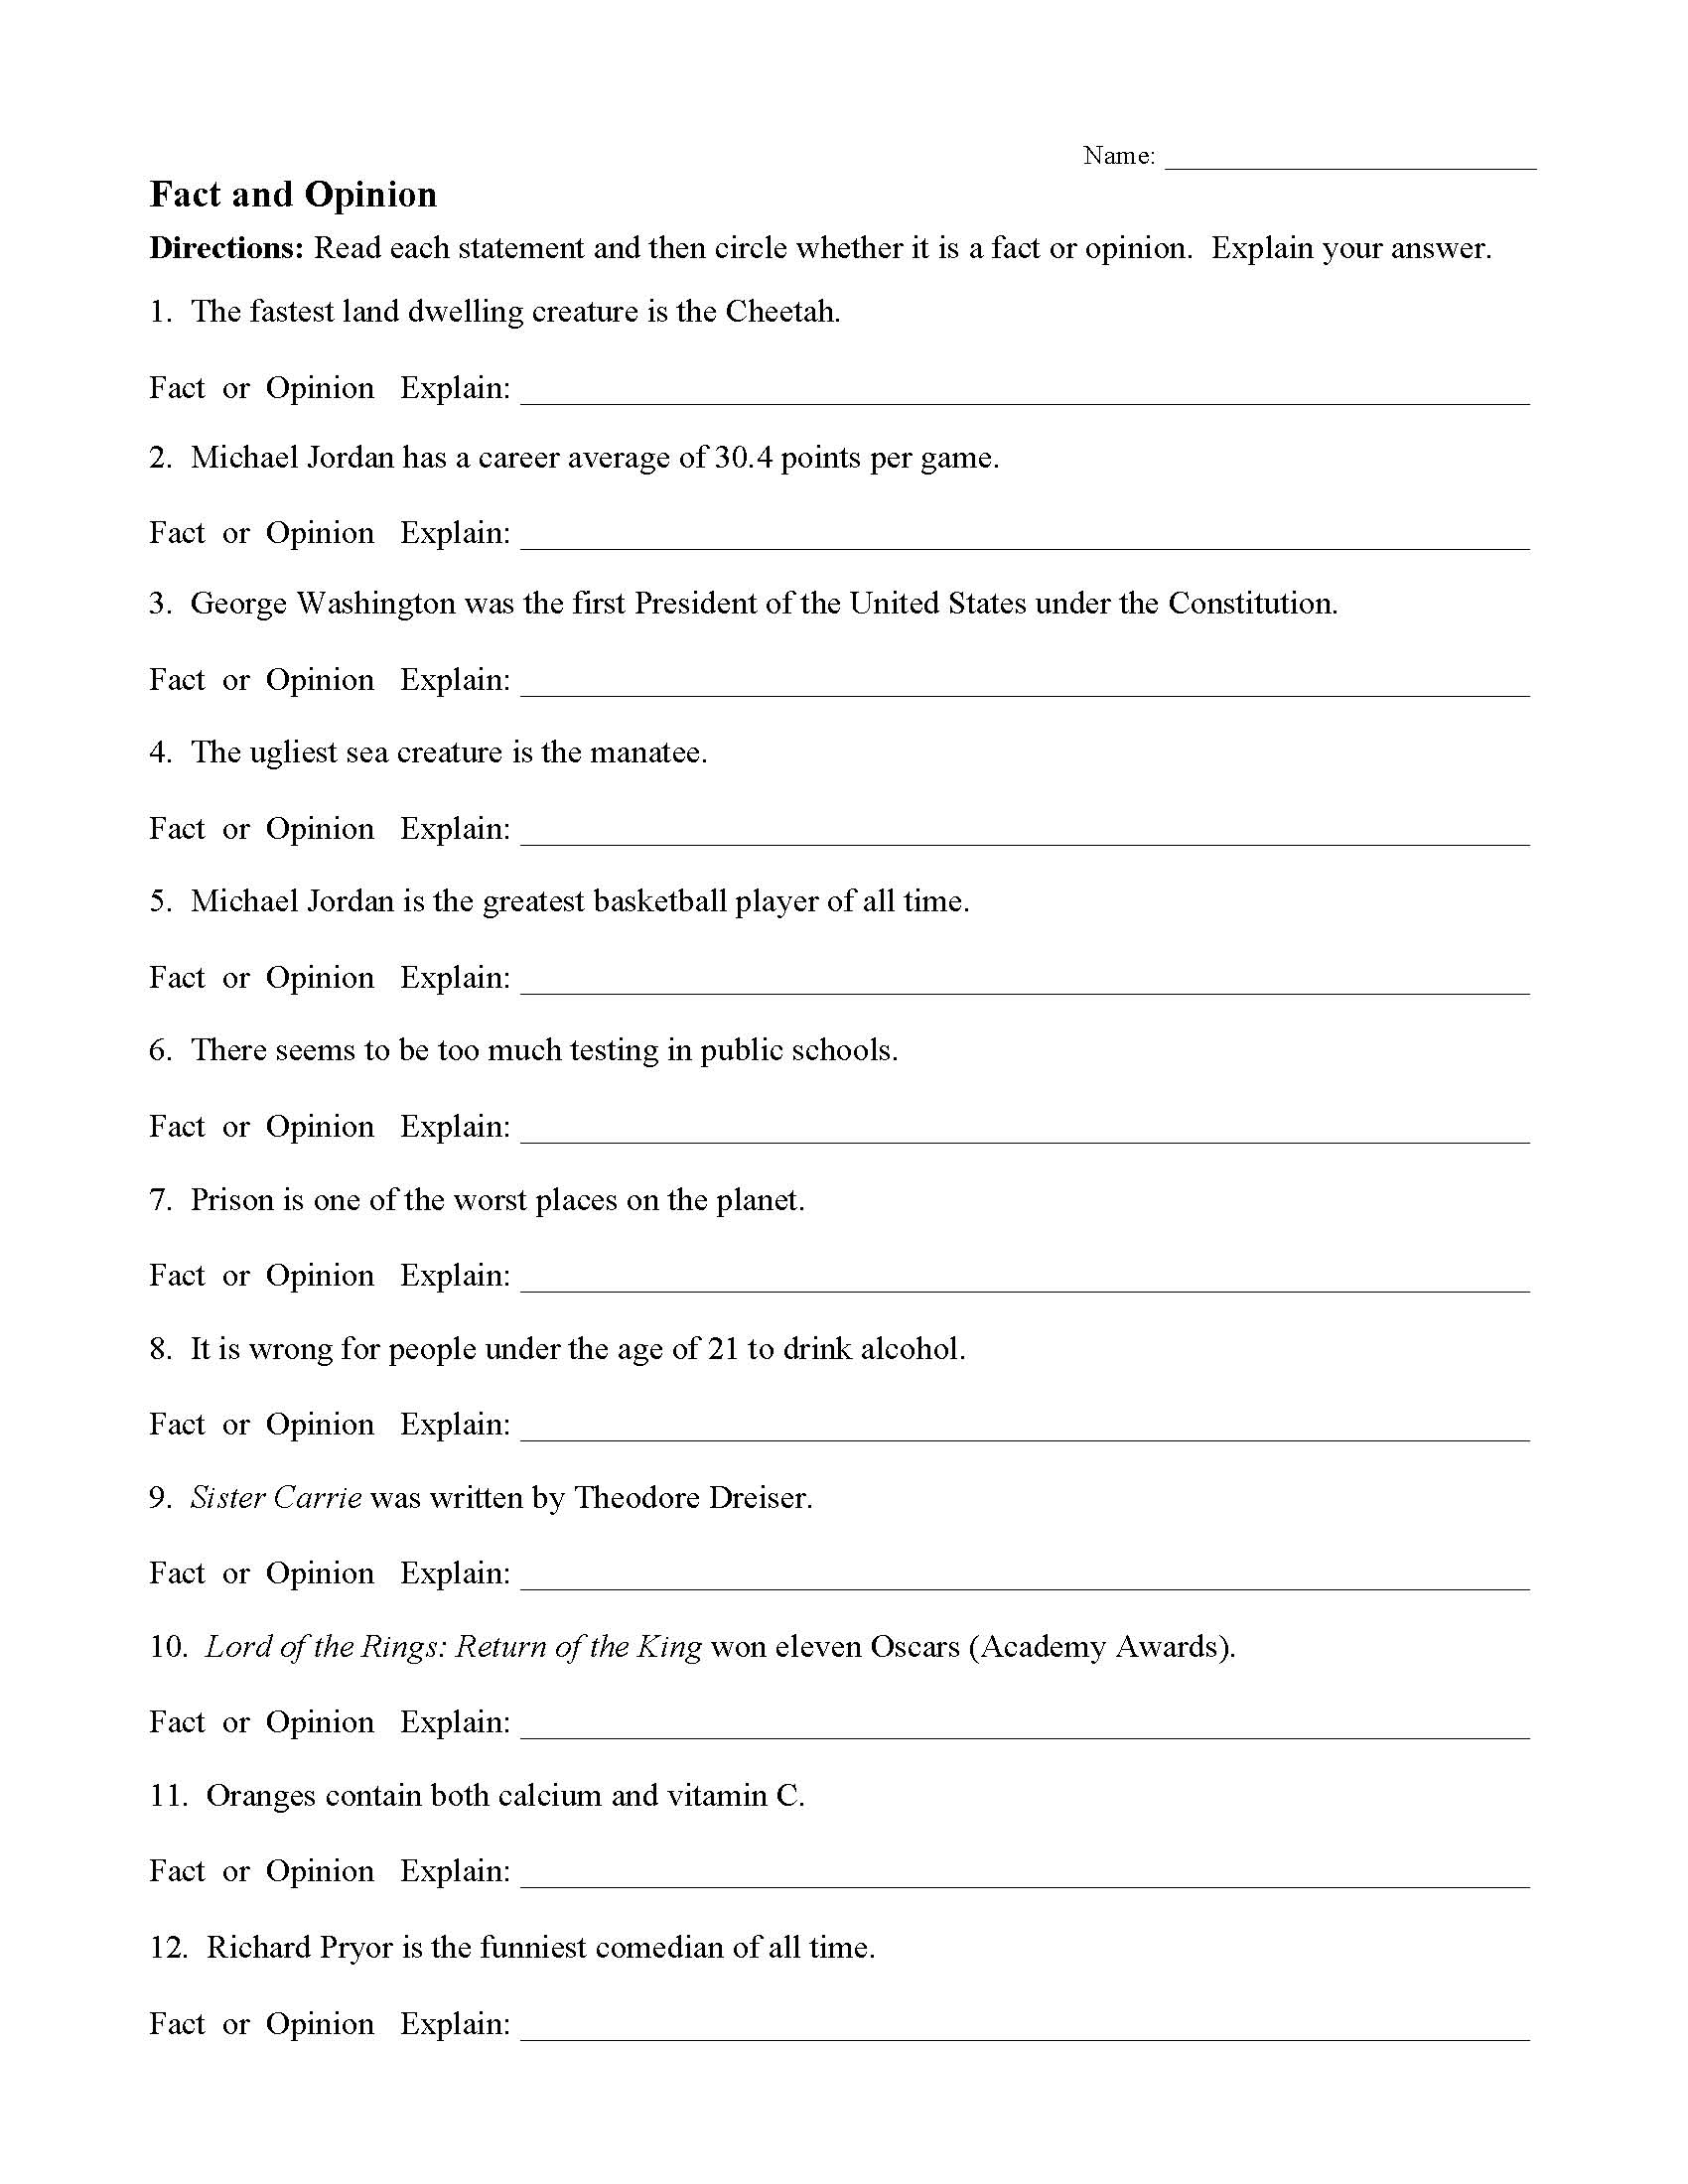 fact-and-opinion-worksheet-1-reading-activity